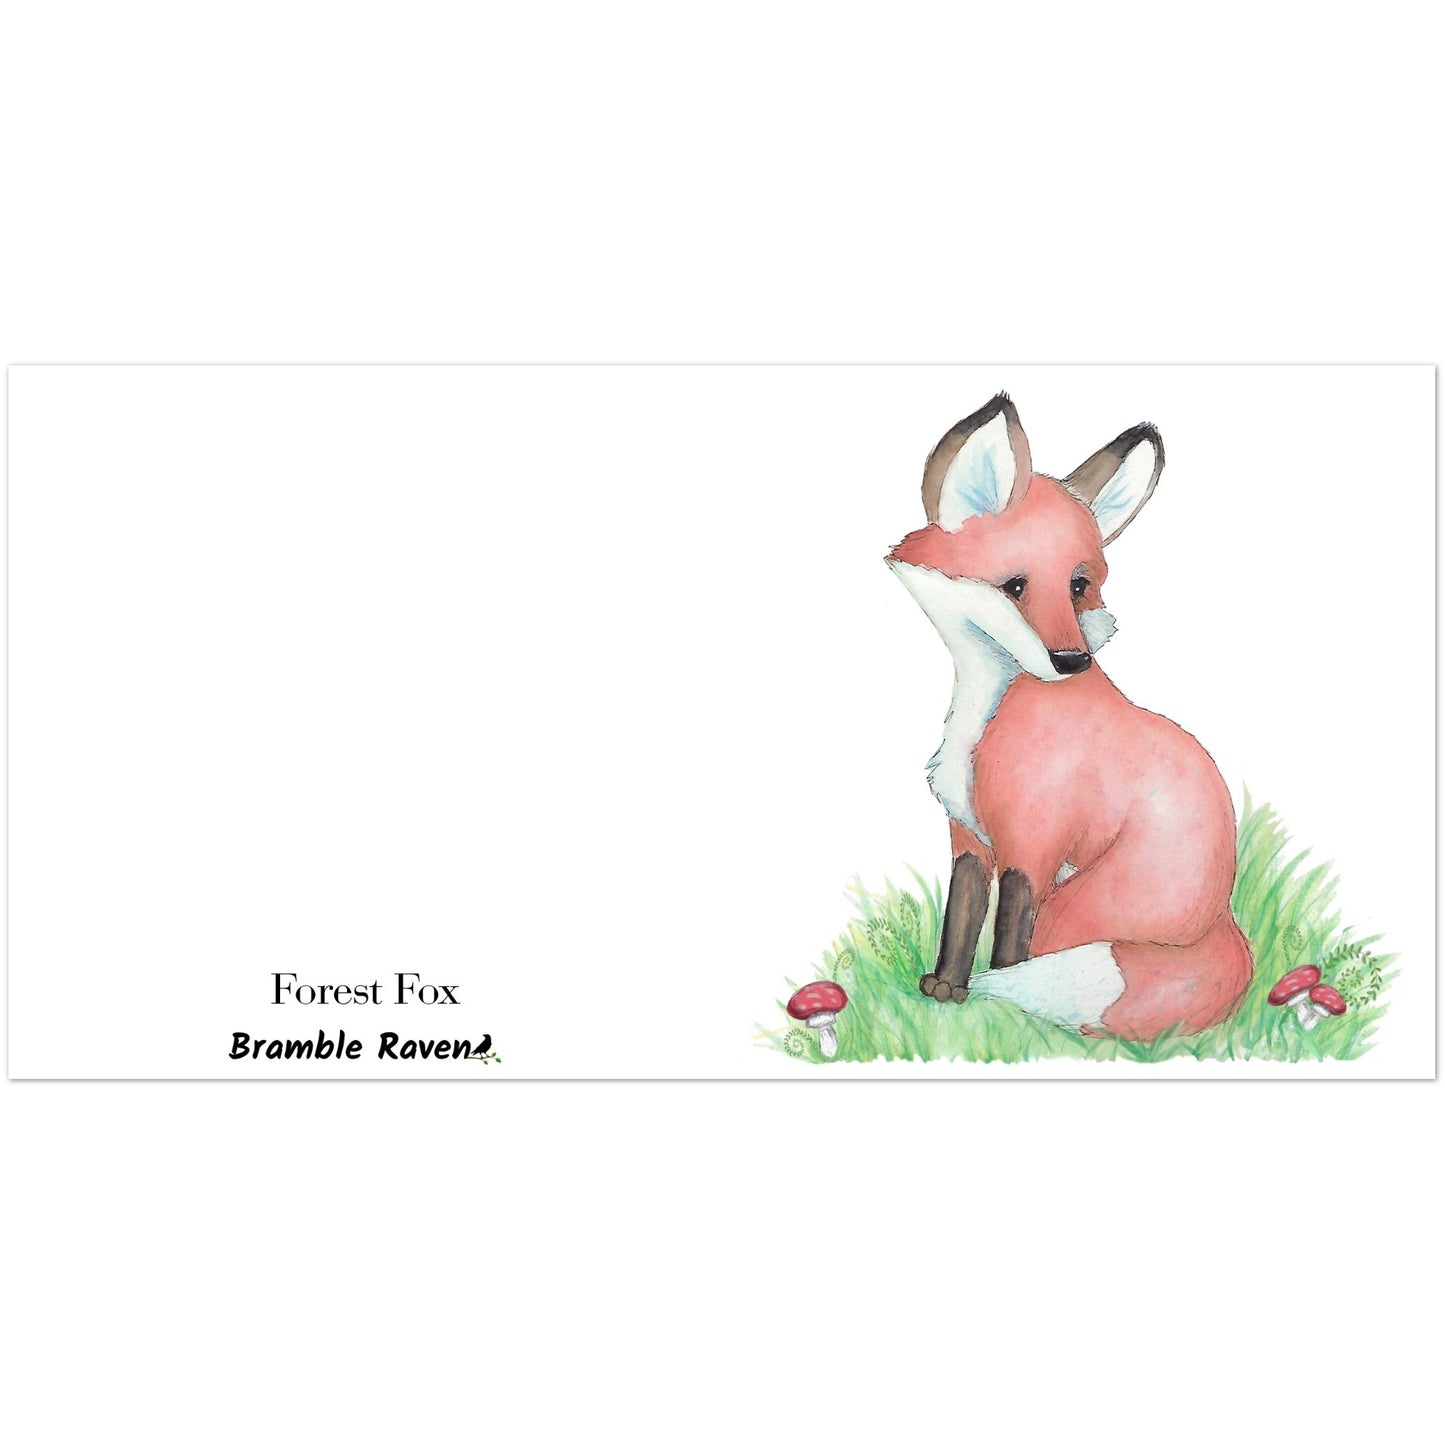 Pack of ten 5.25 x 5.25 inch greeting cards with envelopes. Front of card has watercolor fox nestled in the grass by mushrooms and ferns. Inside is blank. Cards are 130 lb 350 gsm coated paperboard with vibrant printing.  